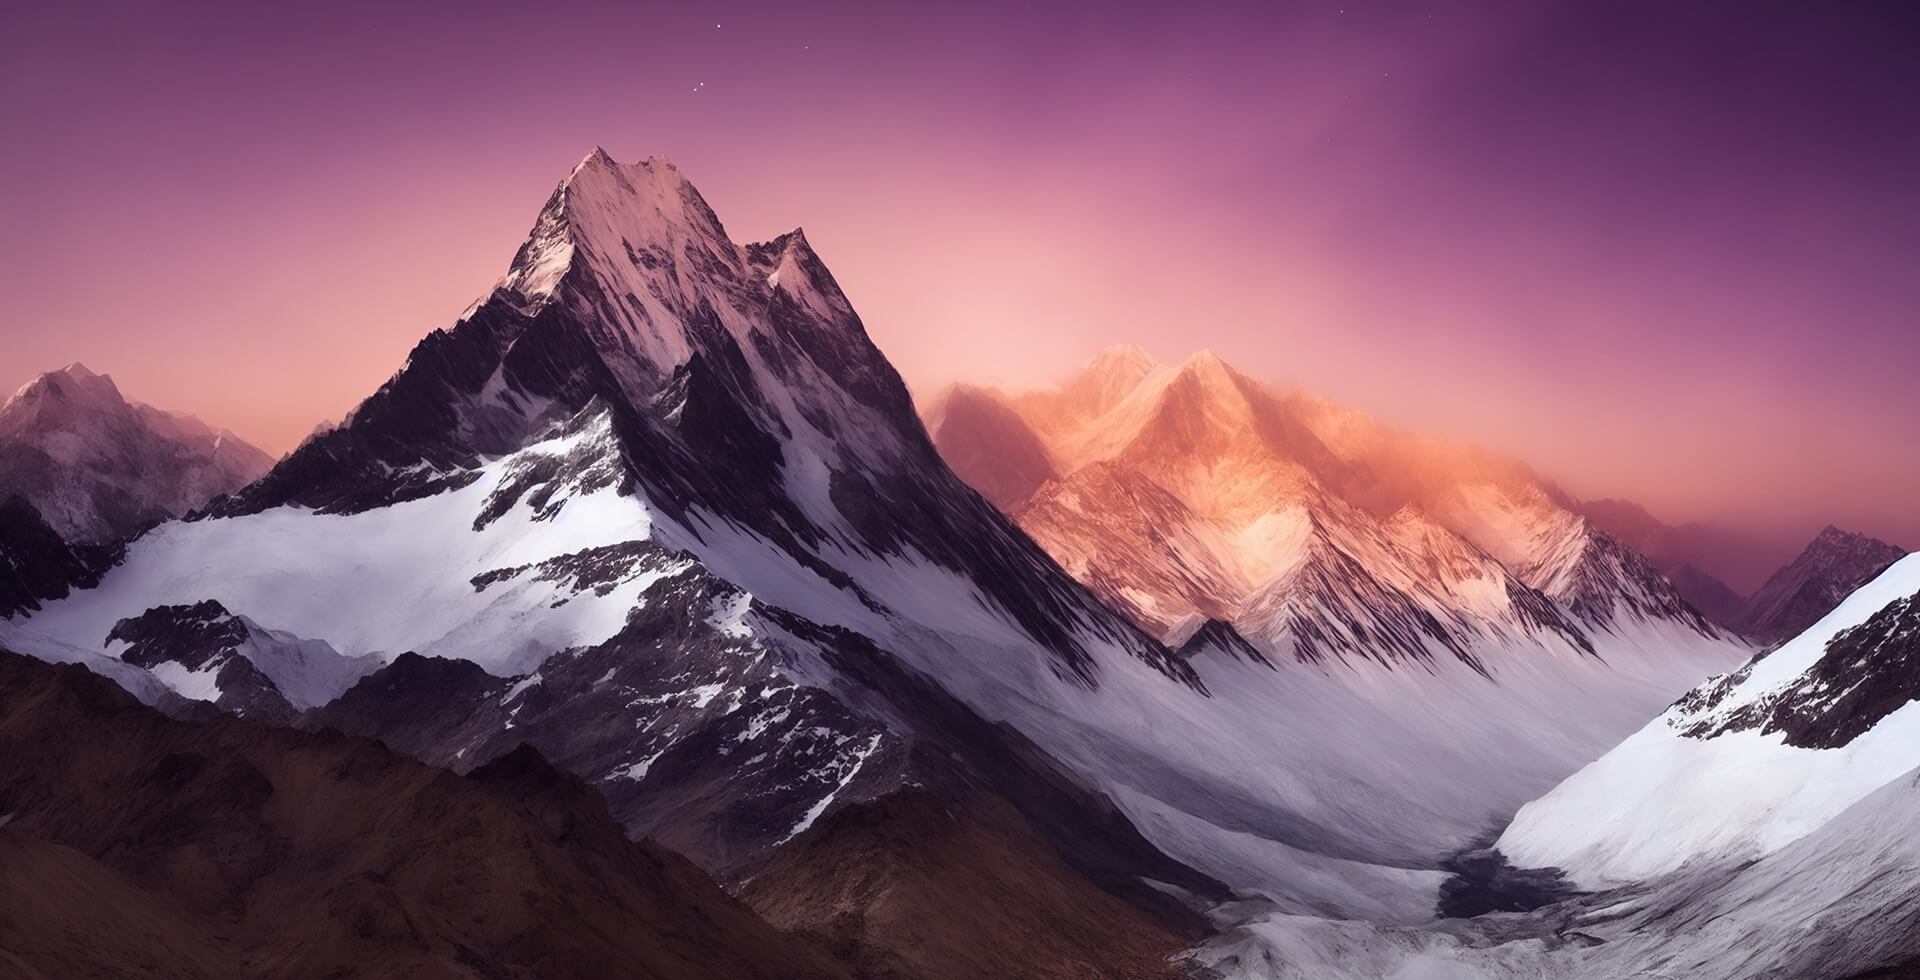 Footer Sunset View of the Himalayas Near the Himalayan Mountain Mt Everest - Purple sky with snow covered cliffs and colorful lighting of the valley and mountain